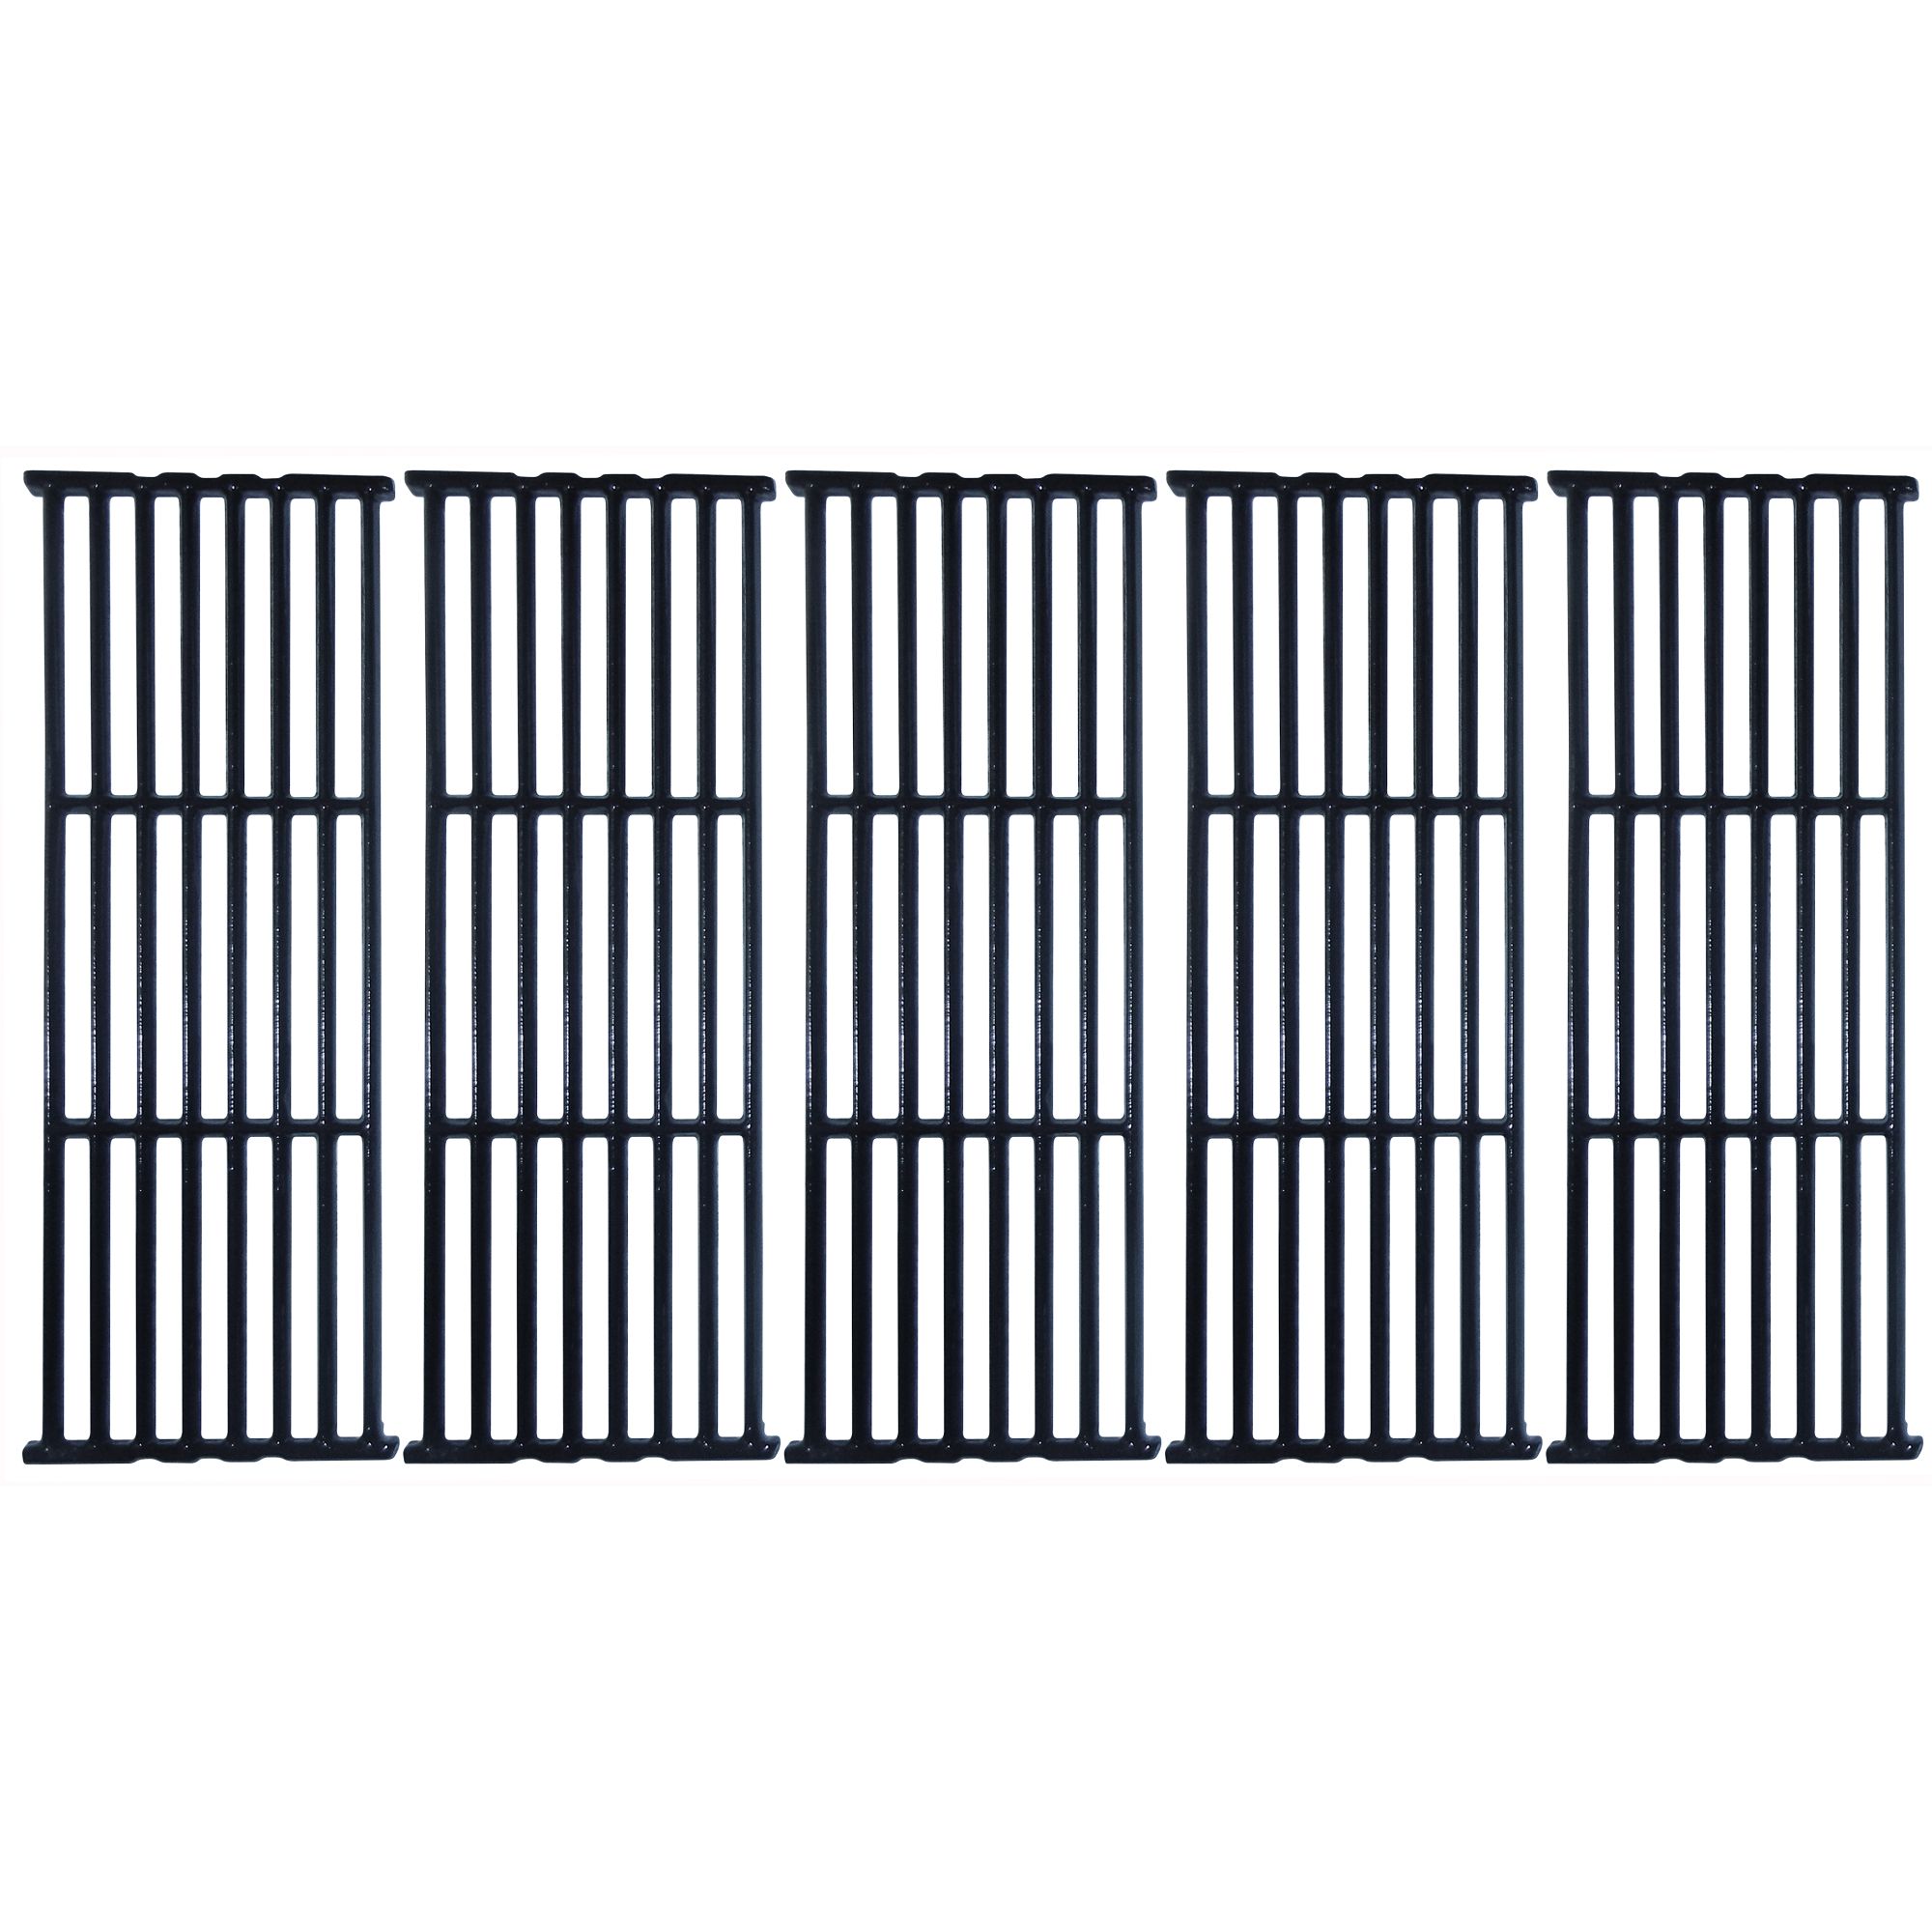 Gloss cast iron cooking grid for Broil King, Broil-Mate, Huntington, Sterling brand gas grills